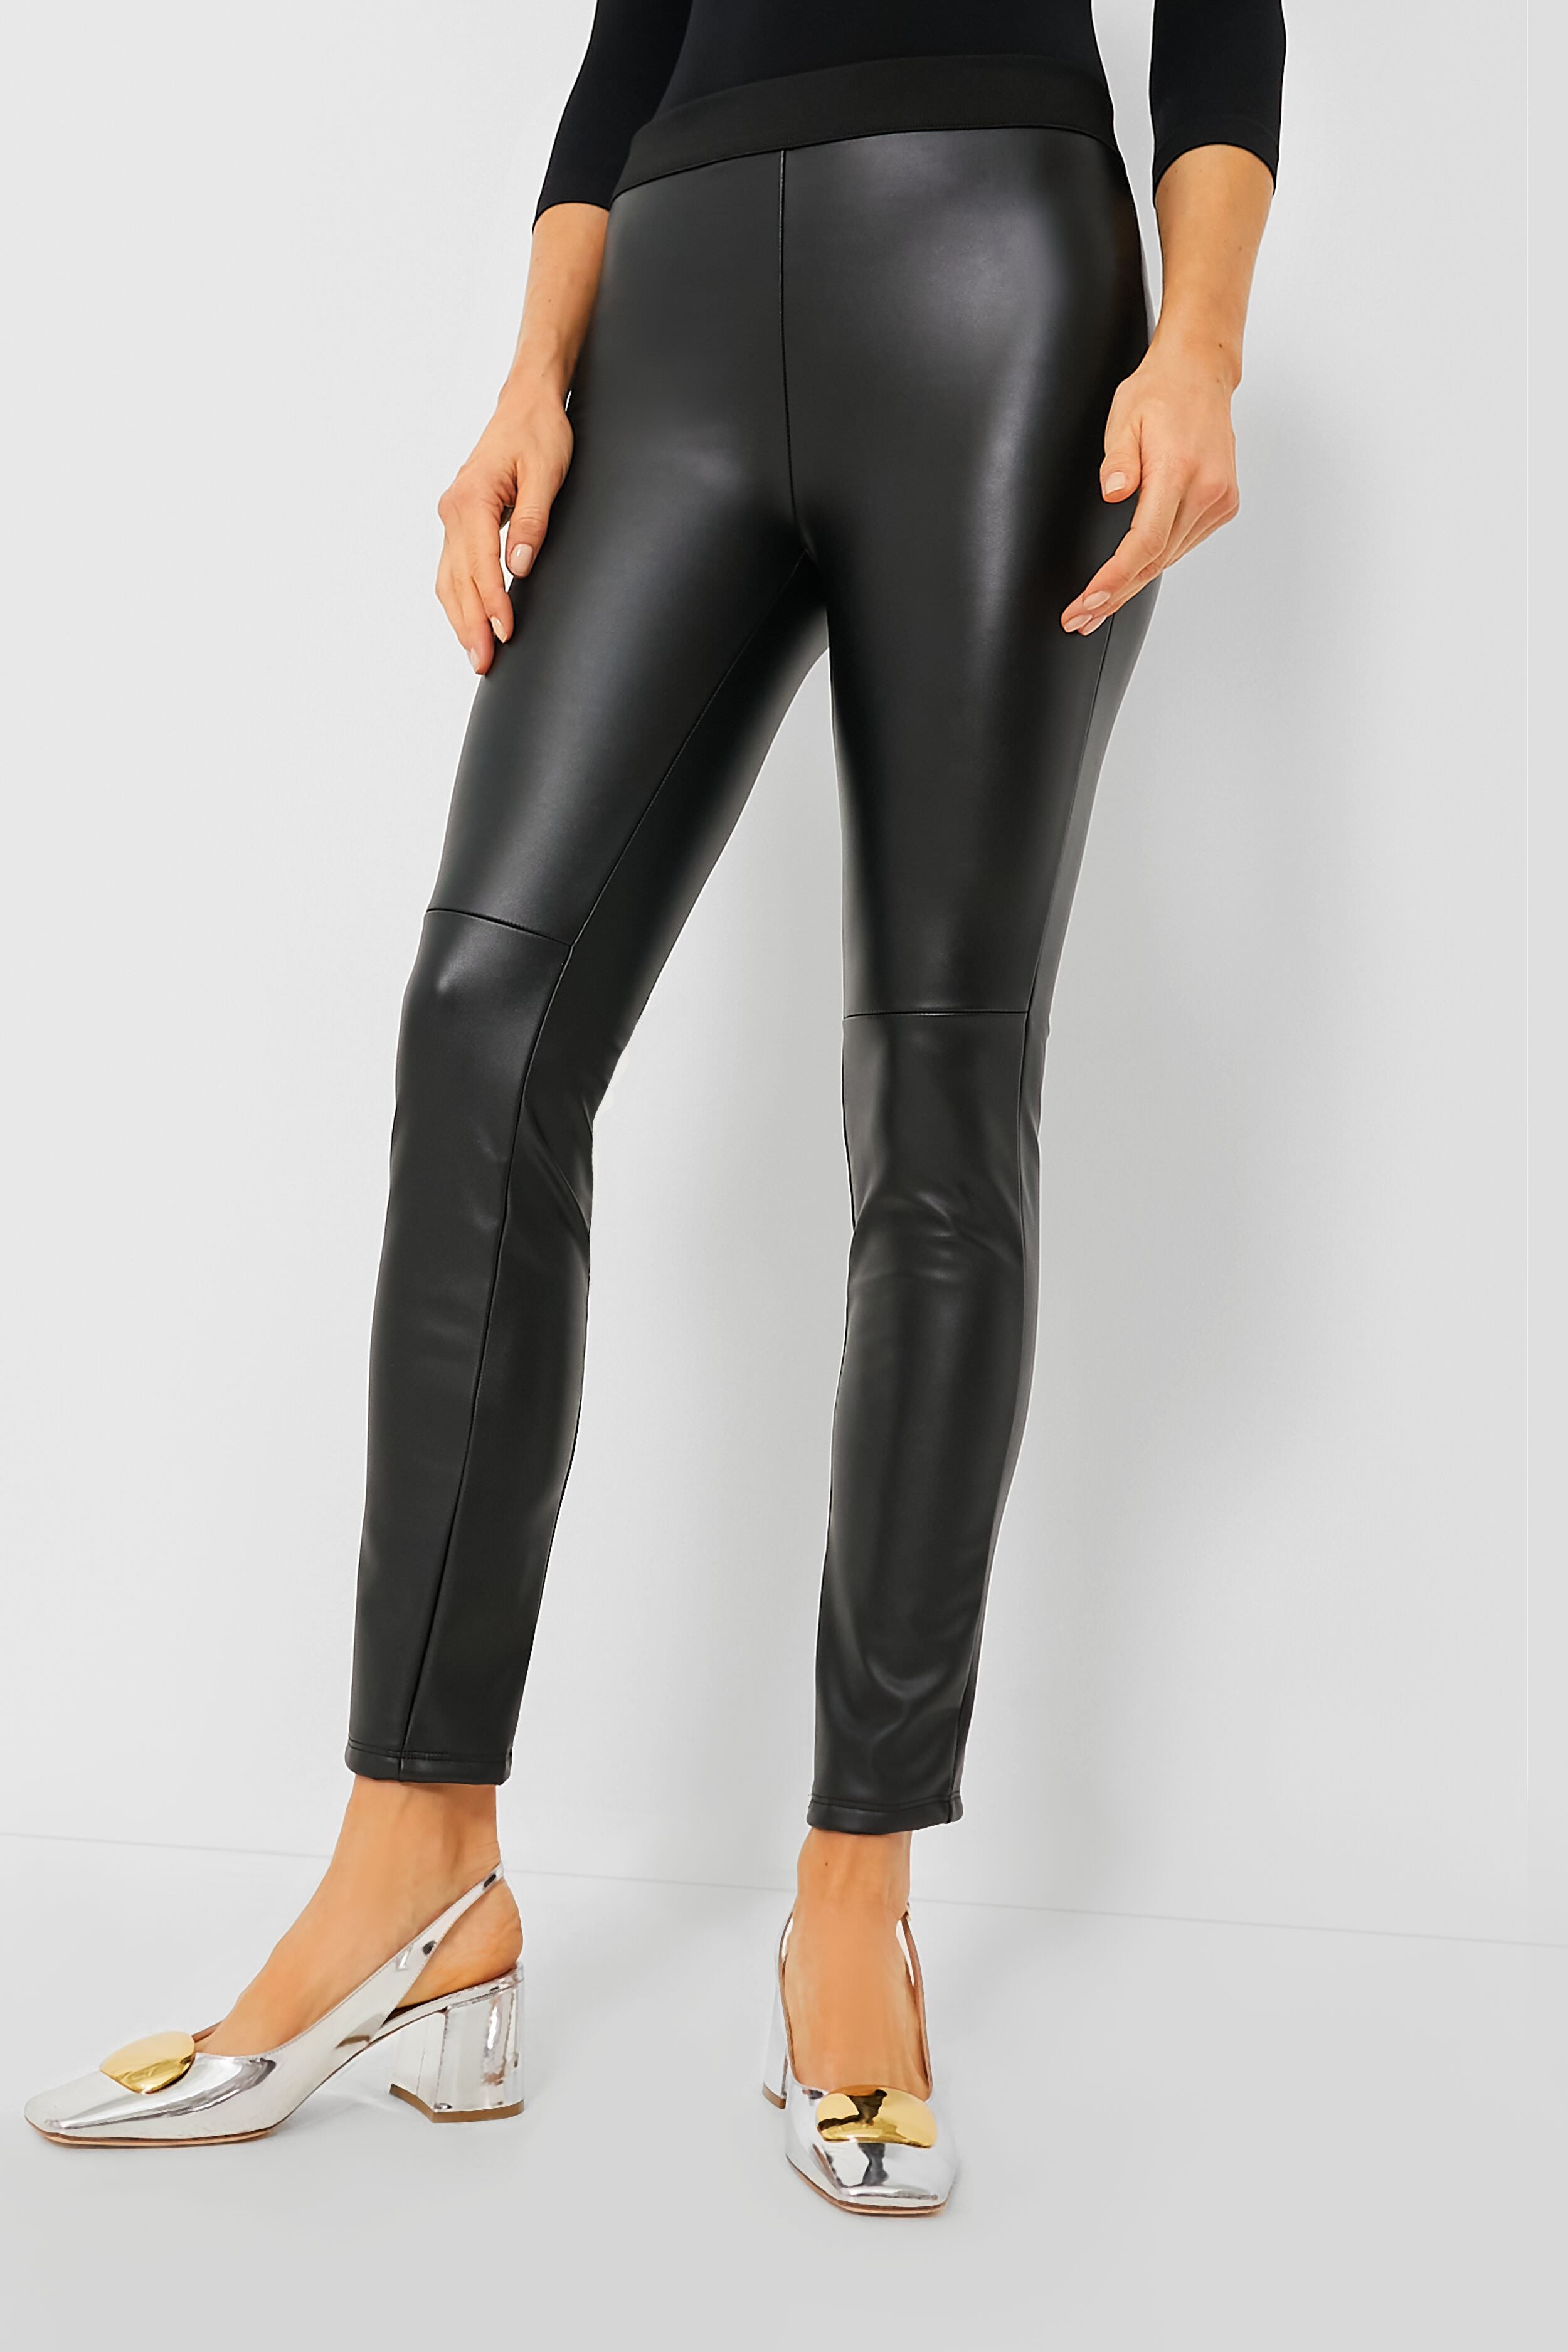 Spanx bestselling faux-leather leggings are $33 off today